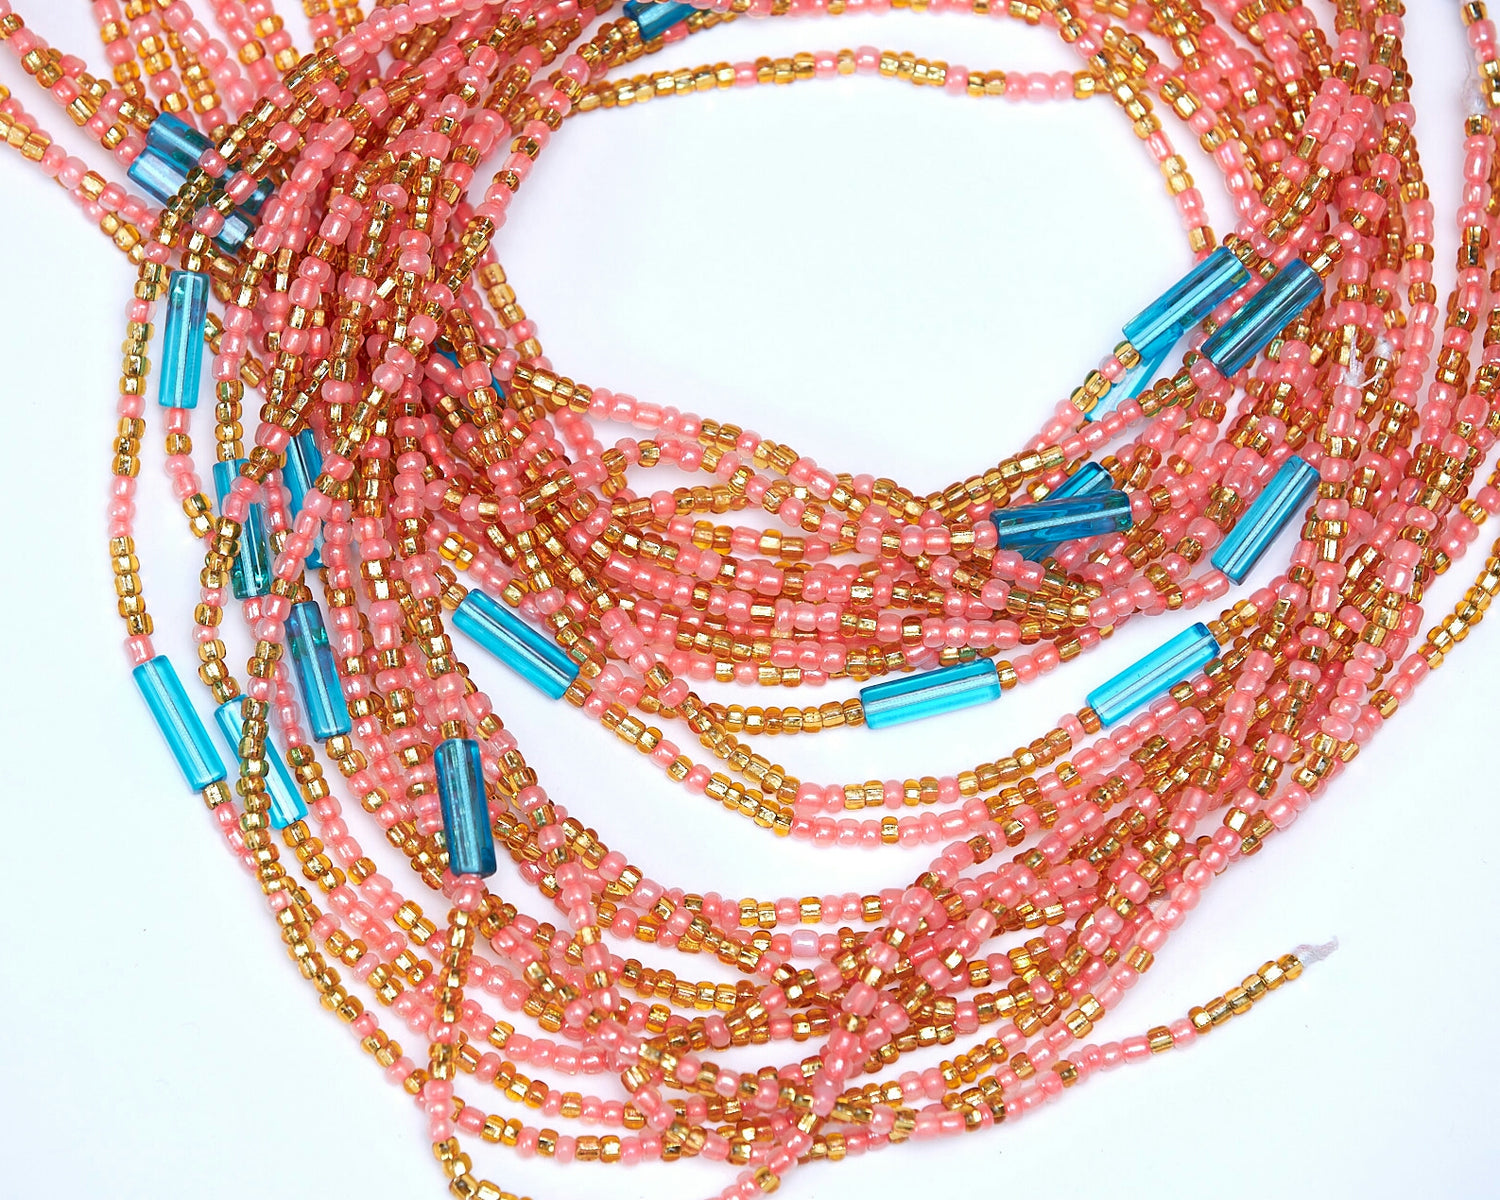 45 Inches Pink And Gold Beads With Sea Blue Pebble Bar Tie On Waist Beads 